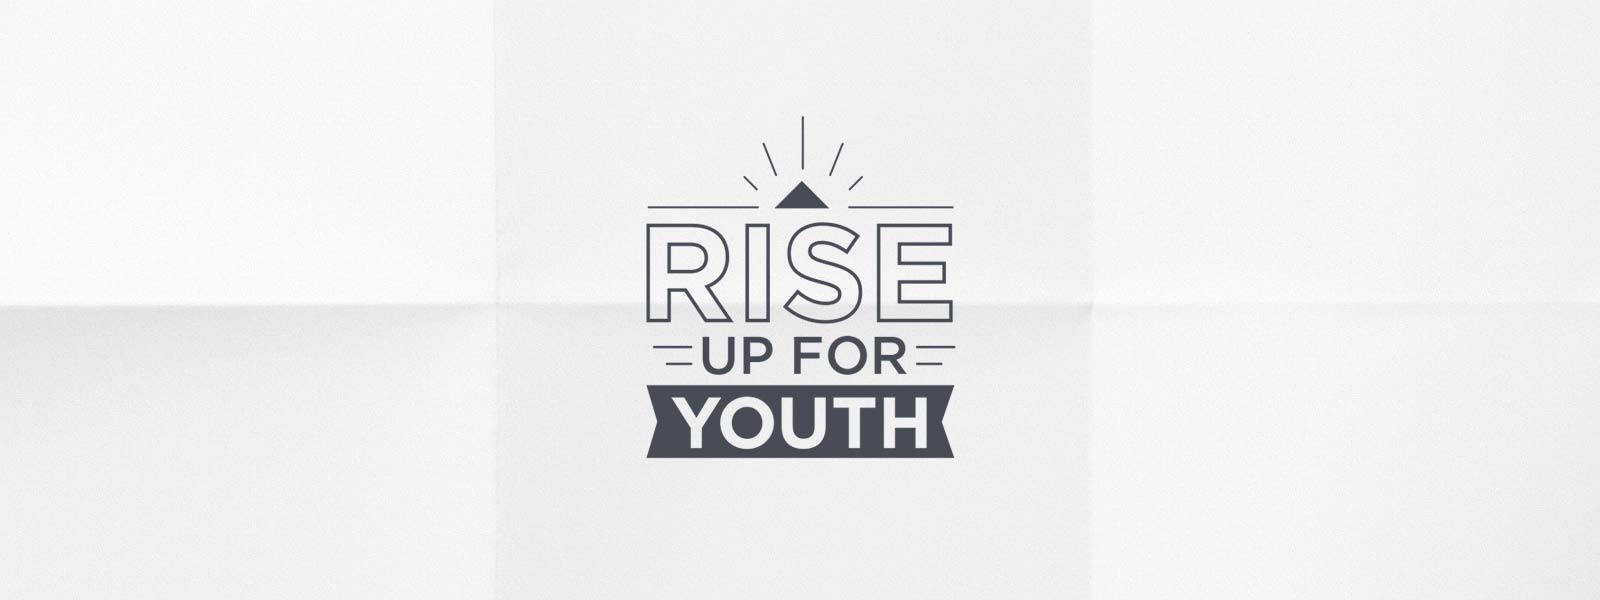 Rise Up For Youth receives $25,000 from Koch Industries